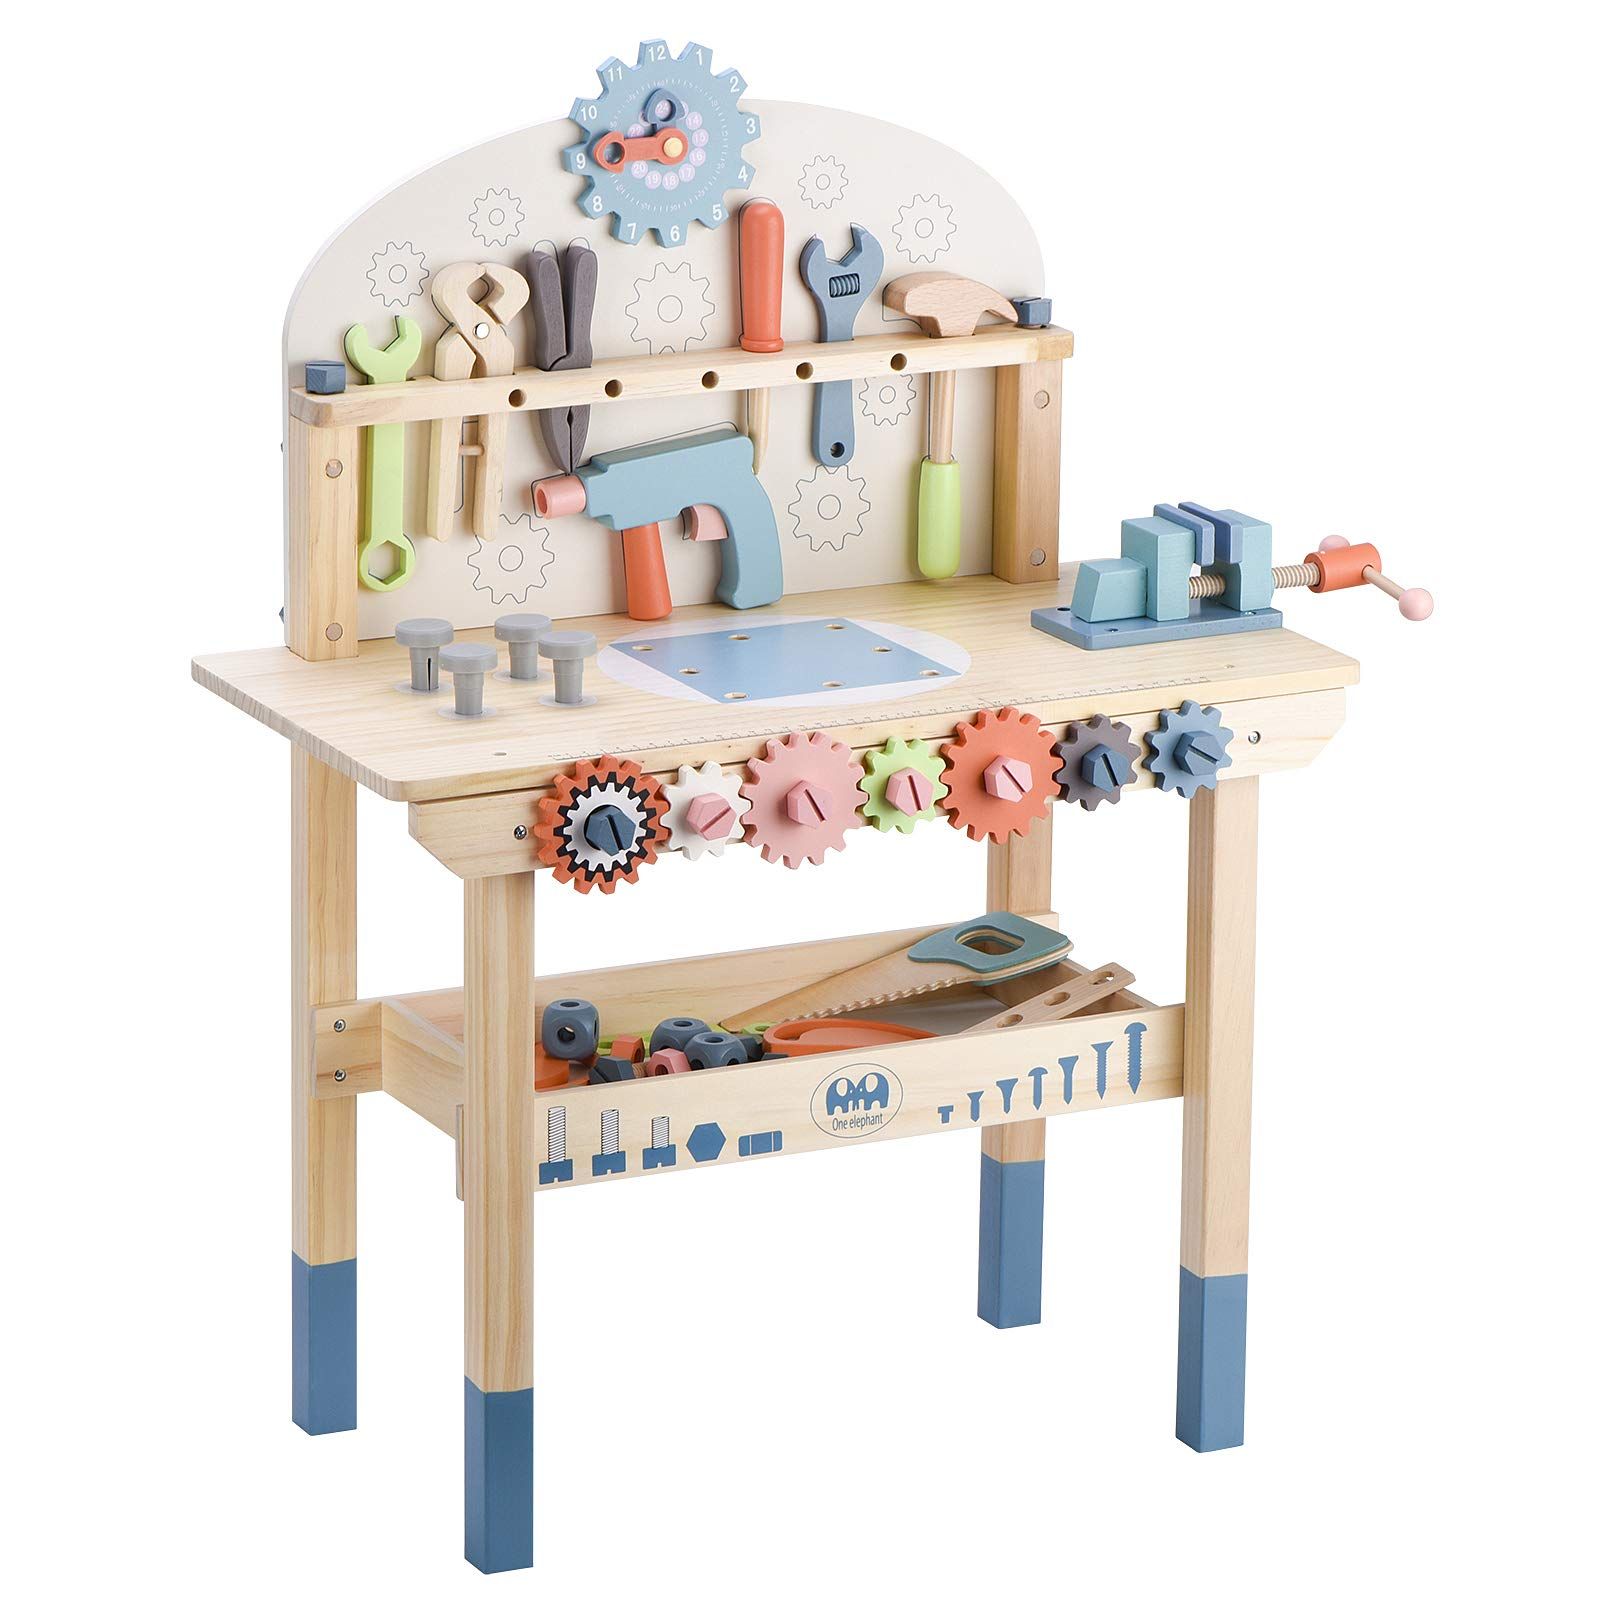 Tool Bench for Kids Toy Play Workbench Wooden Tool Bench Workshop Workbench with Tools Set Wooden Co | Amazon (US)